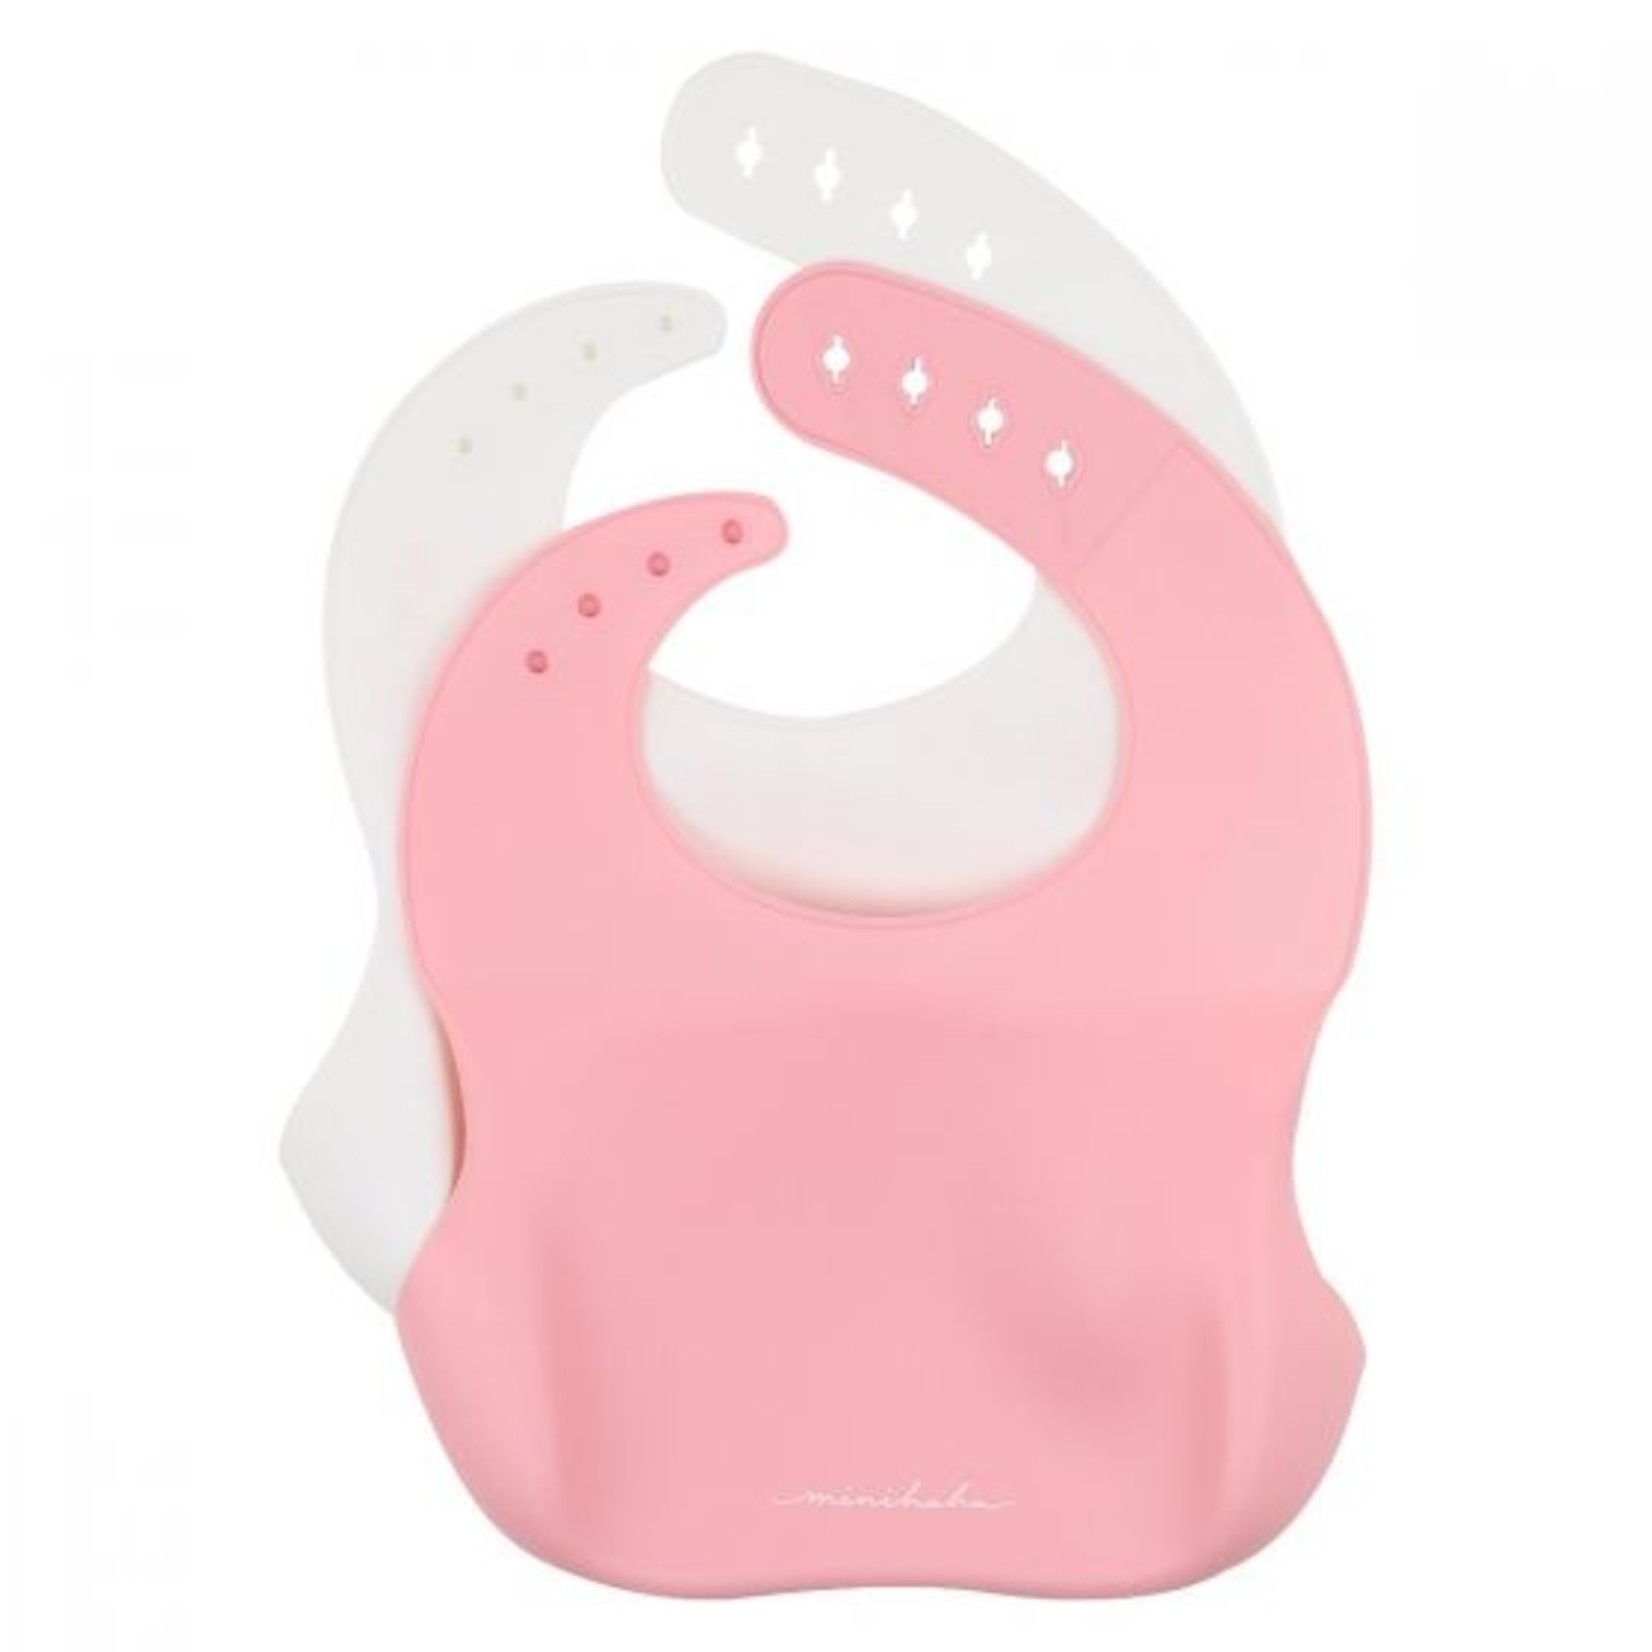 Minihaha 2 Pack Silicone Bibs Floral Pink